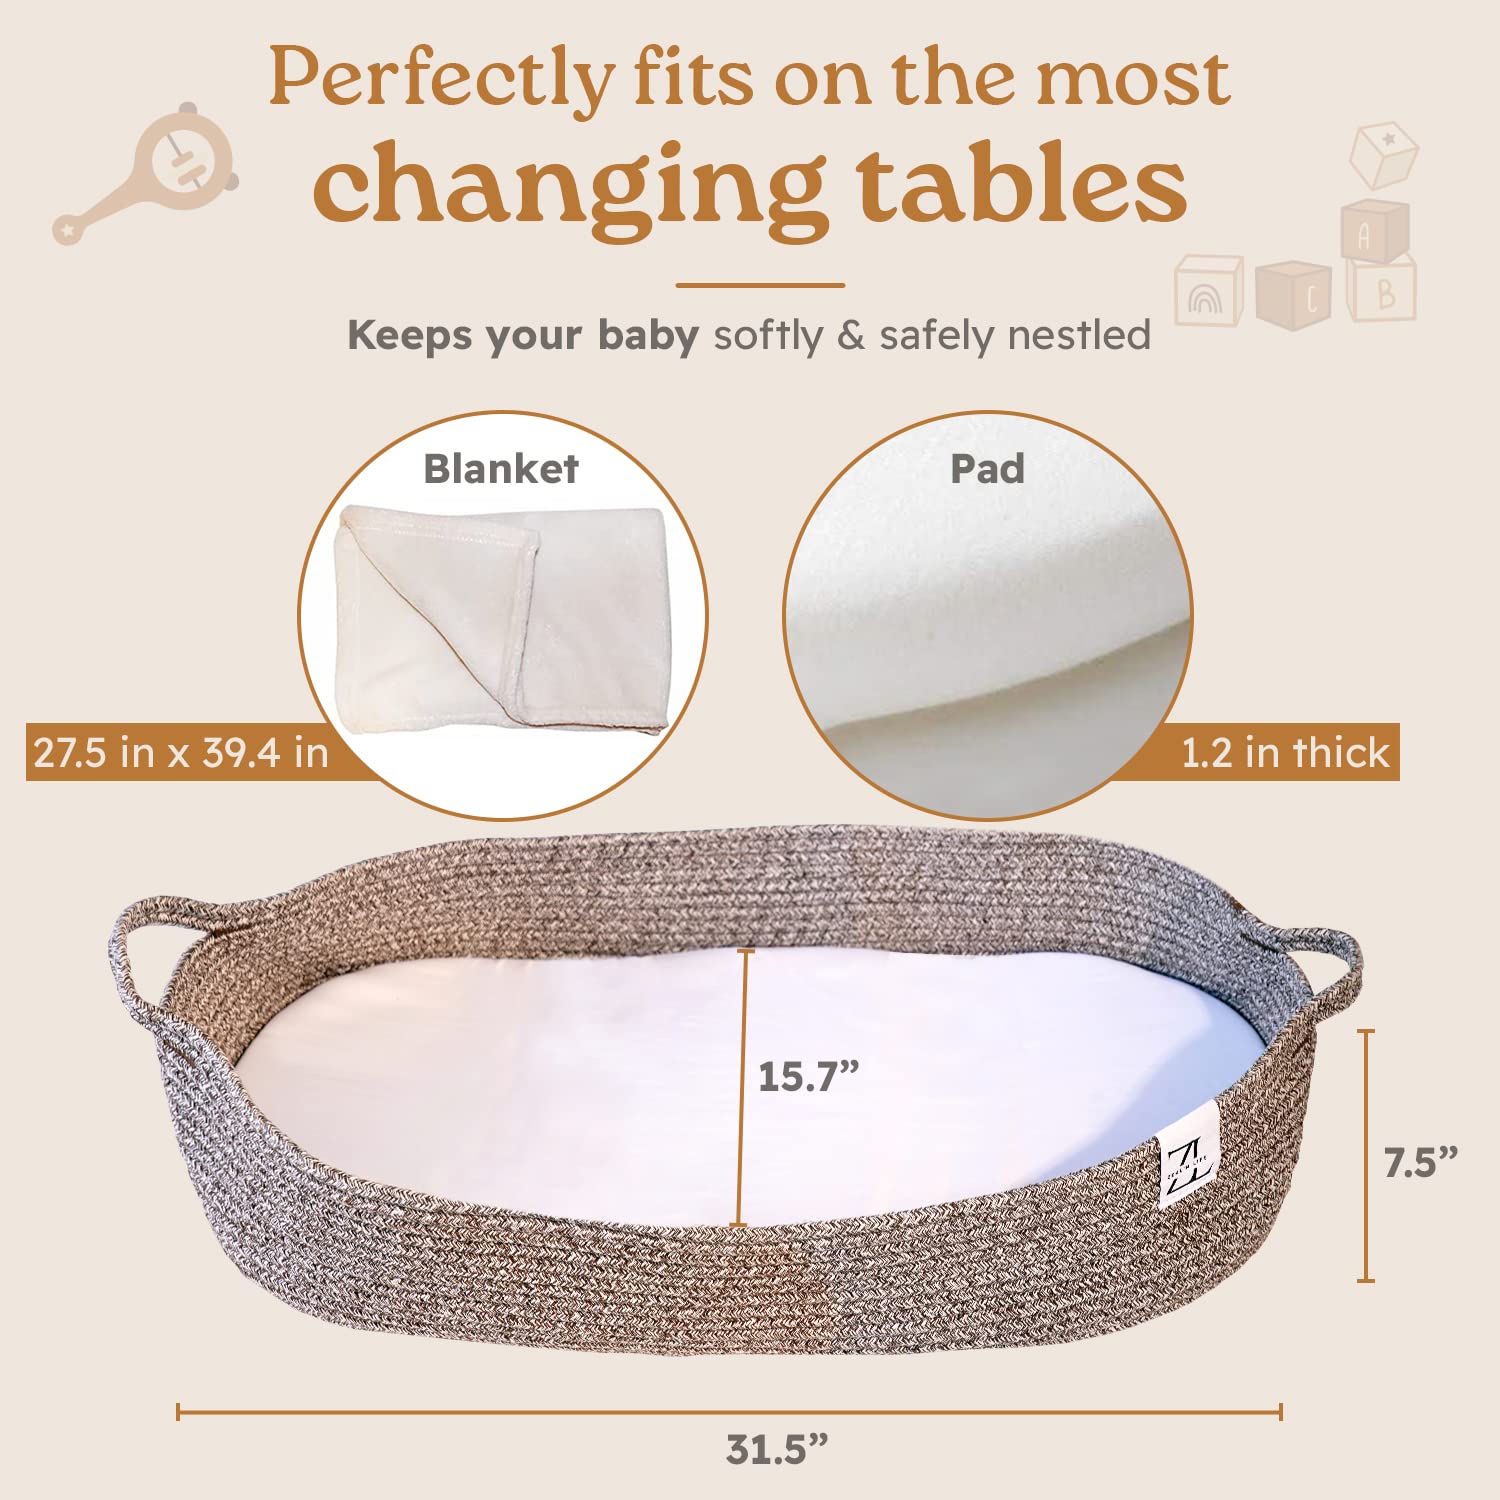 Baby changing bassinet with changing tables and pad